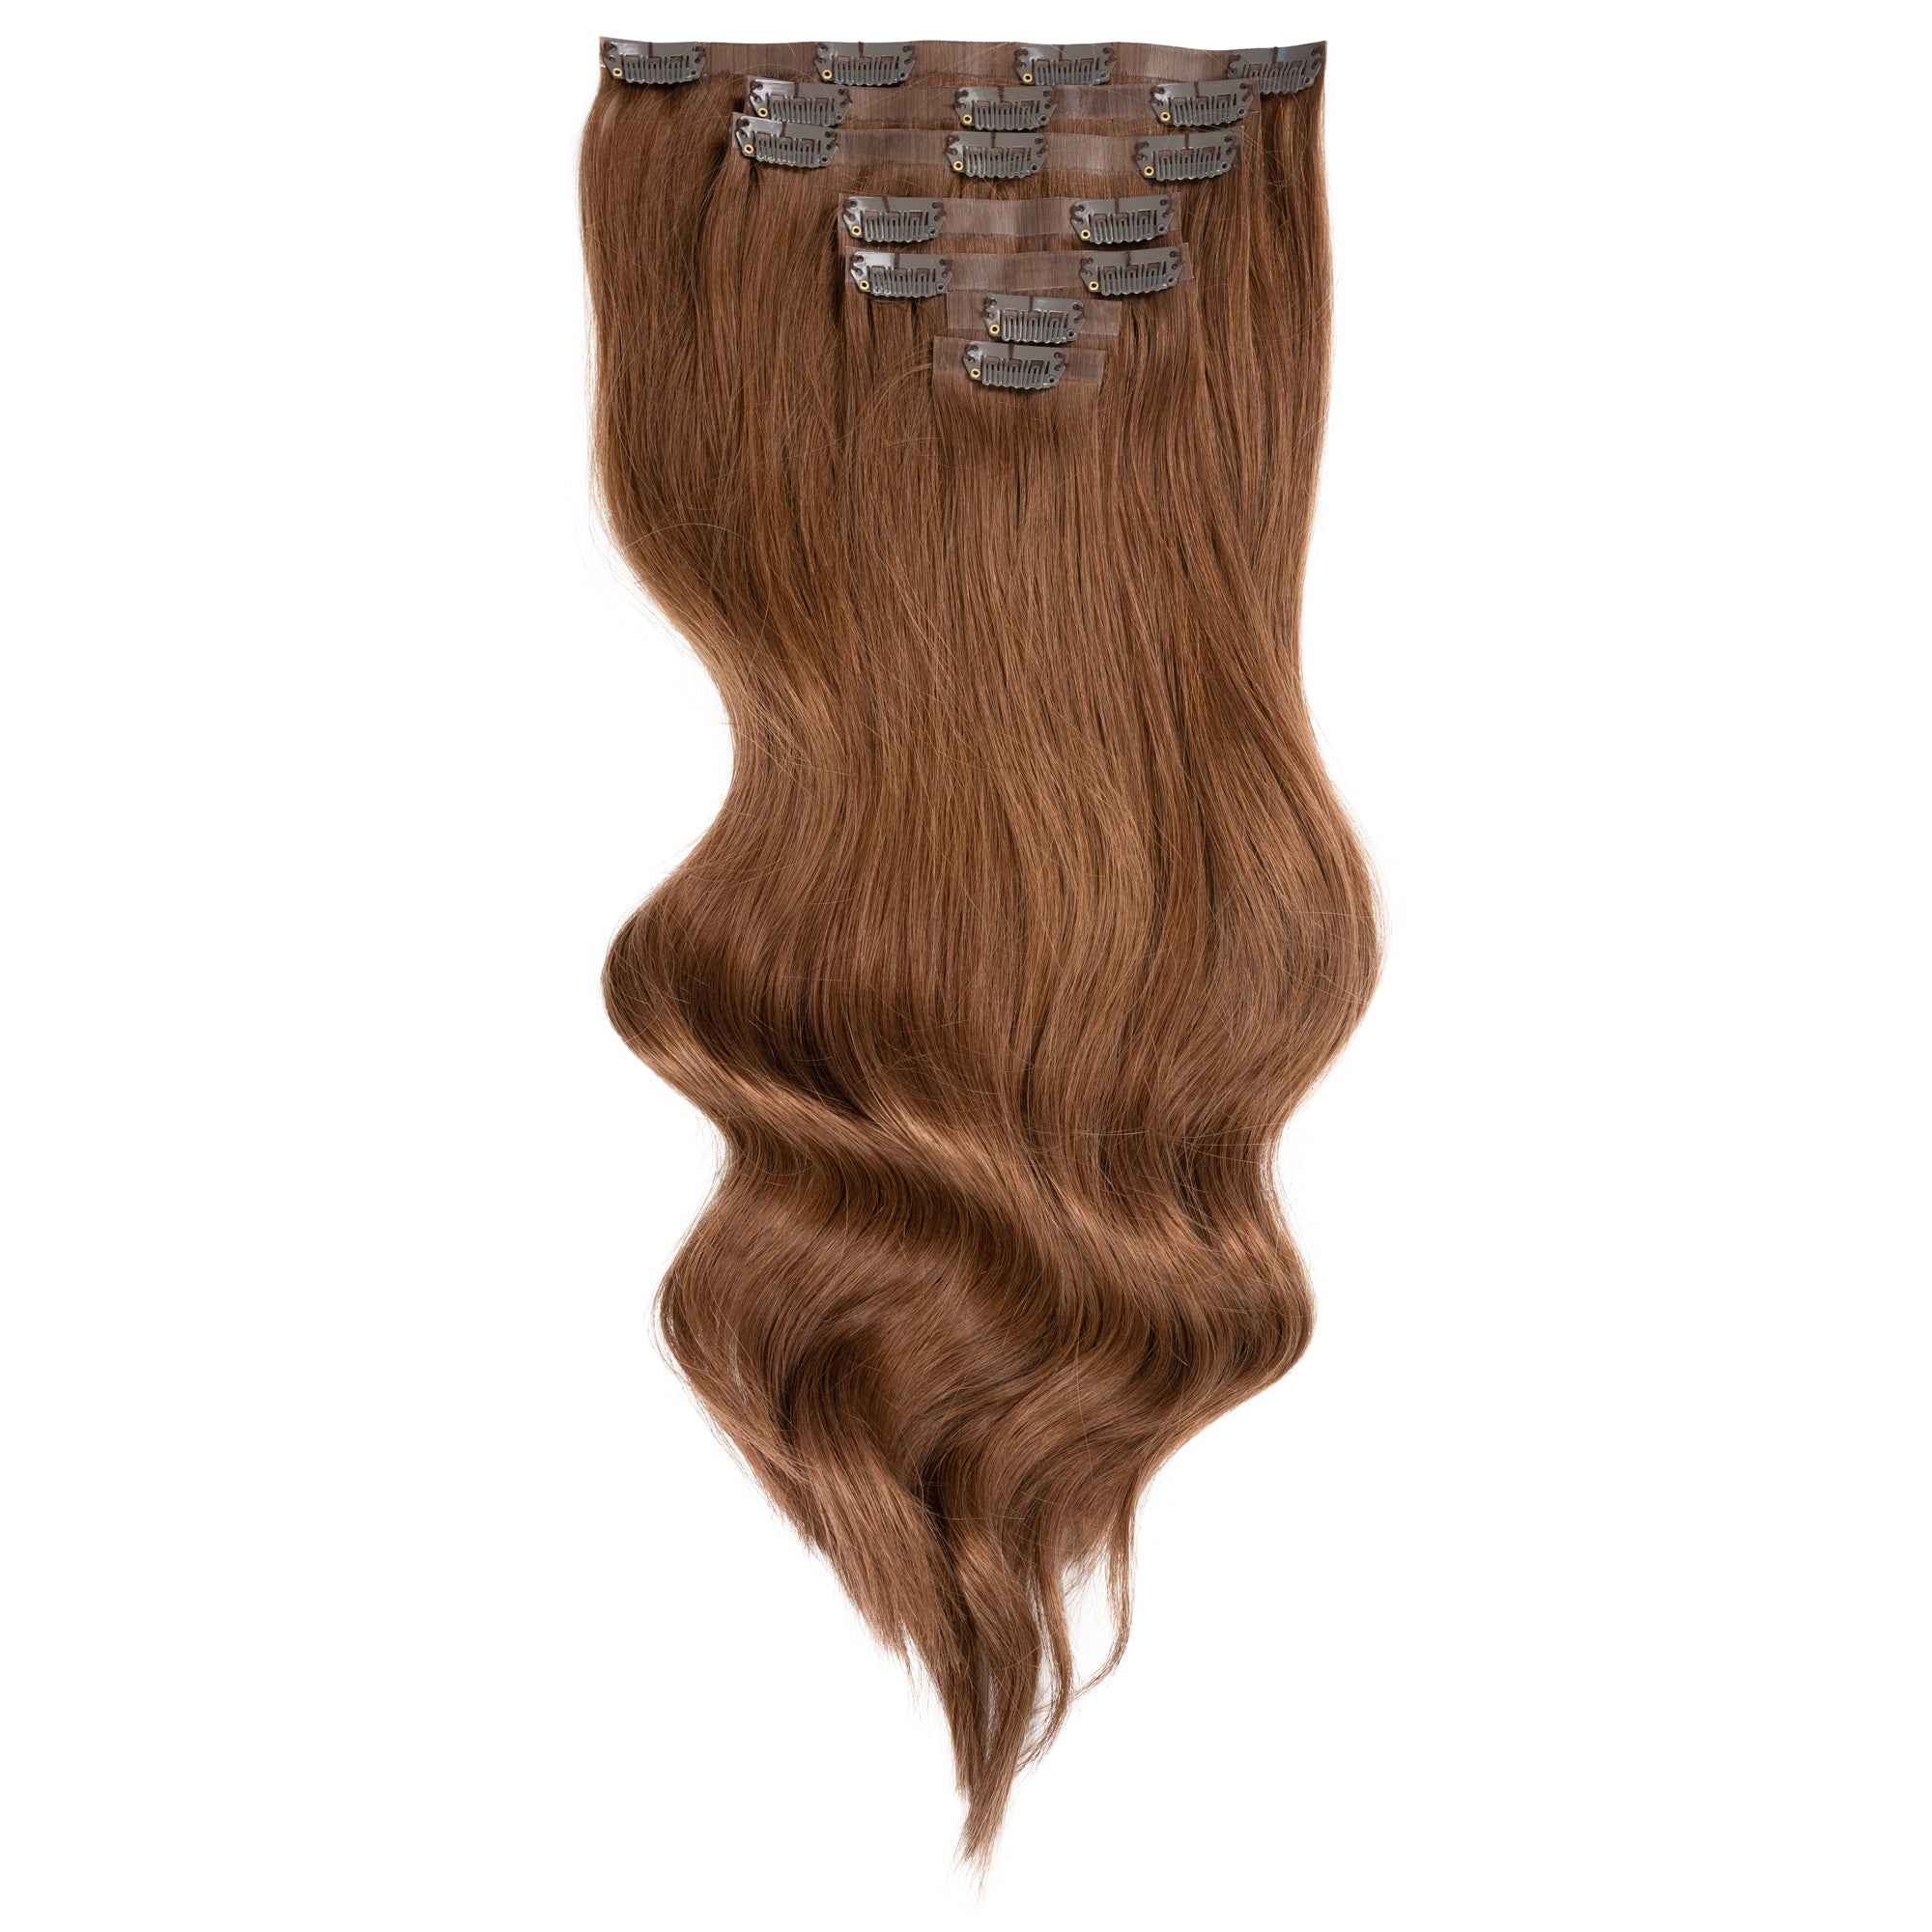 Duchess Elegant Clip-in Hair Extensions 16" Colour 5 Light Brown - Maneology Hair Extensions